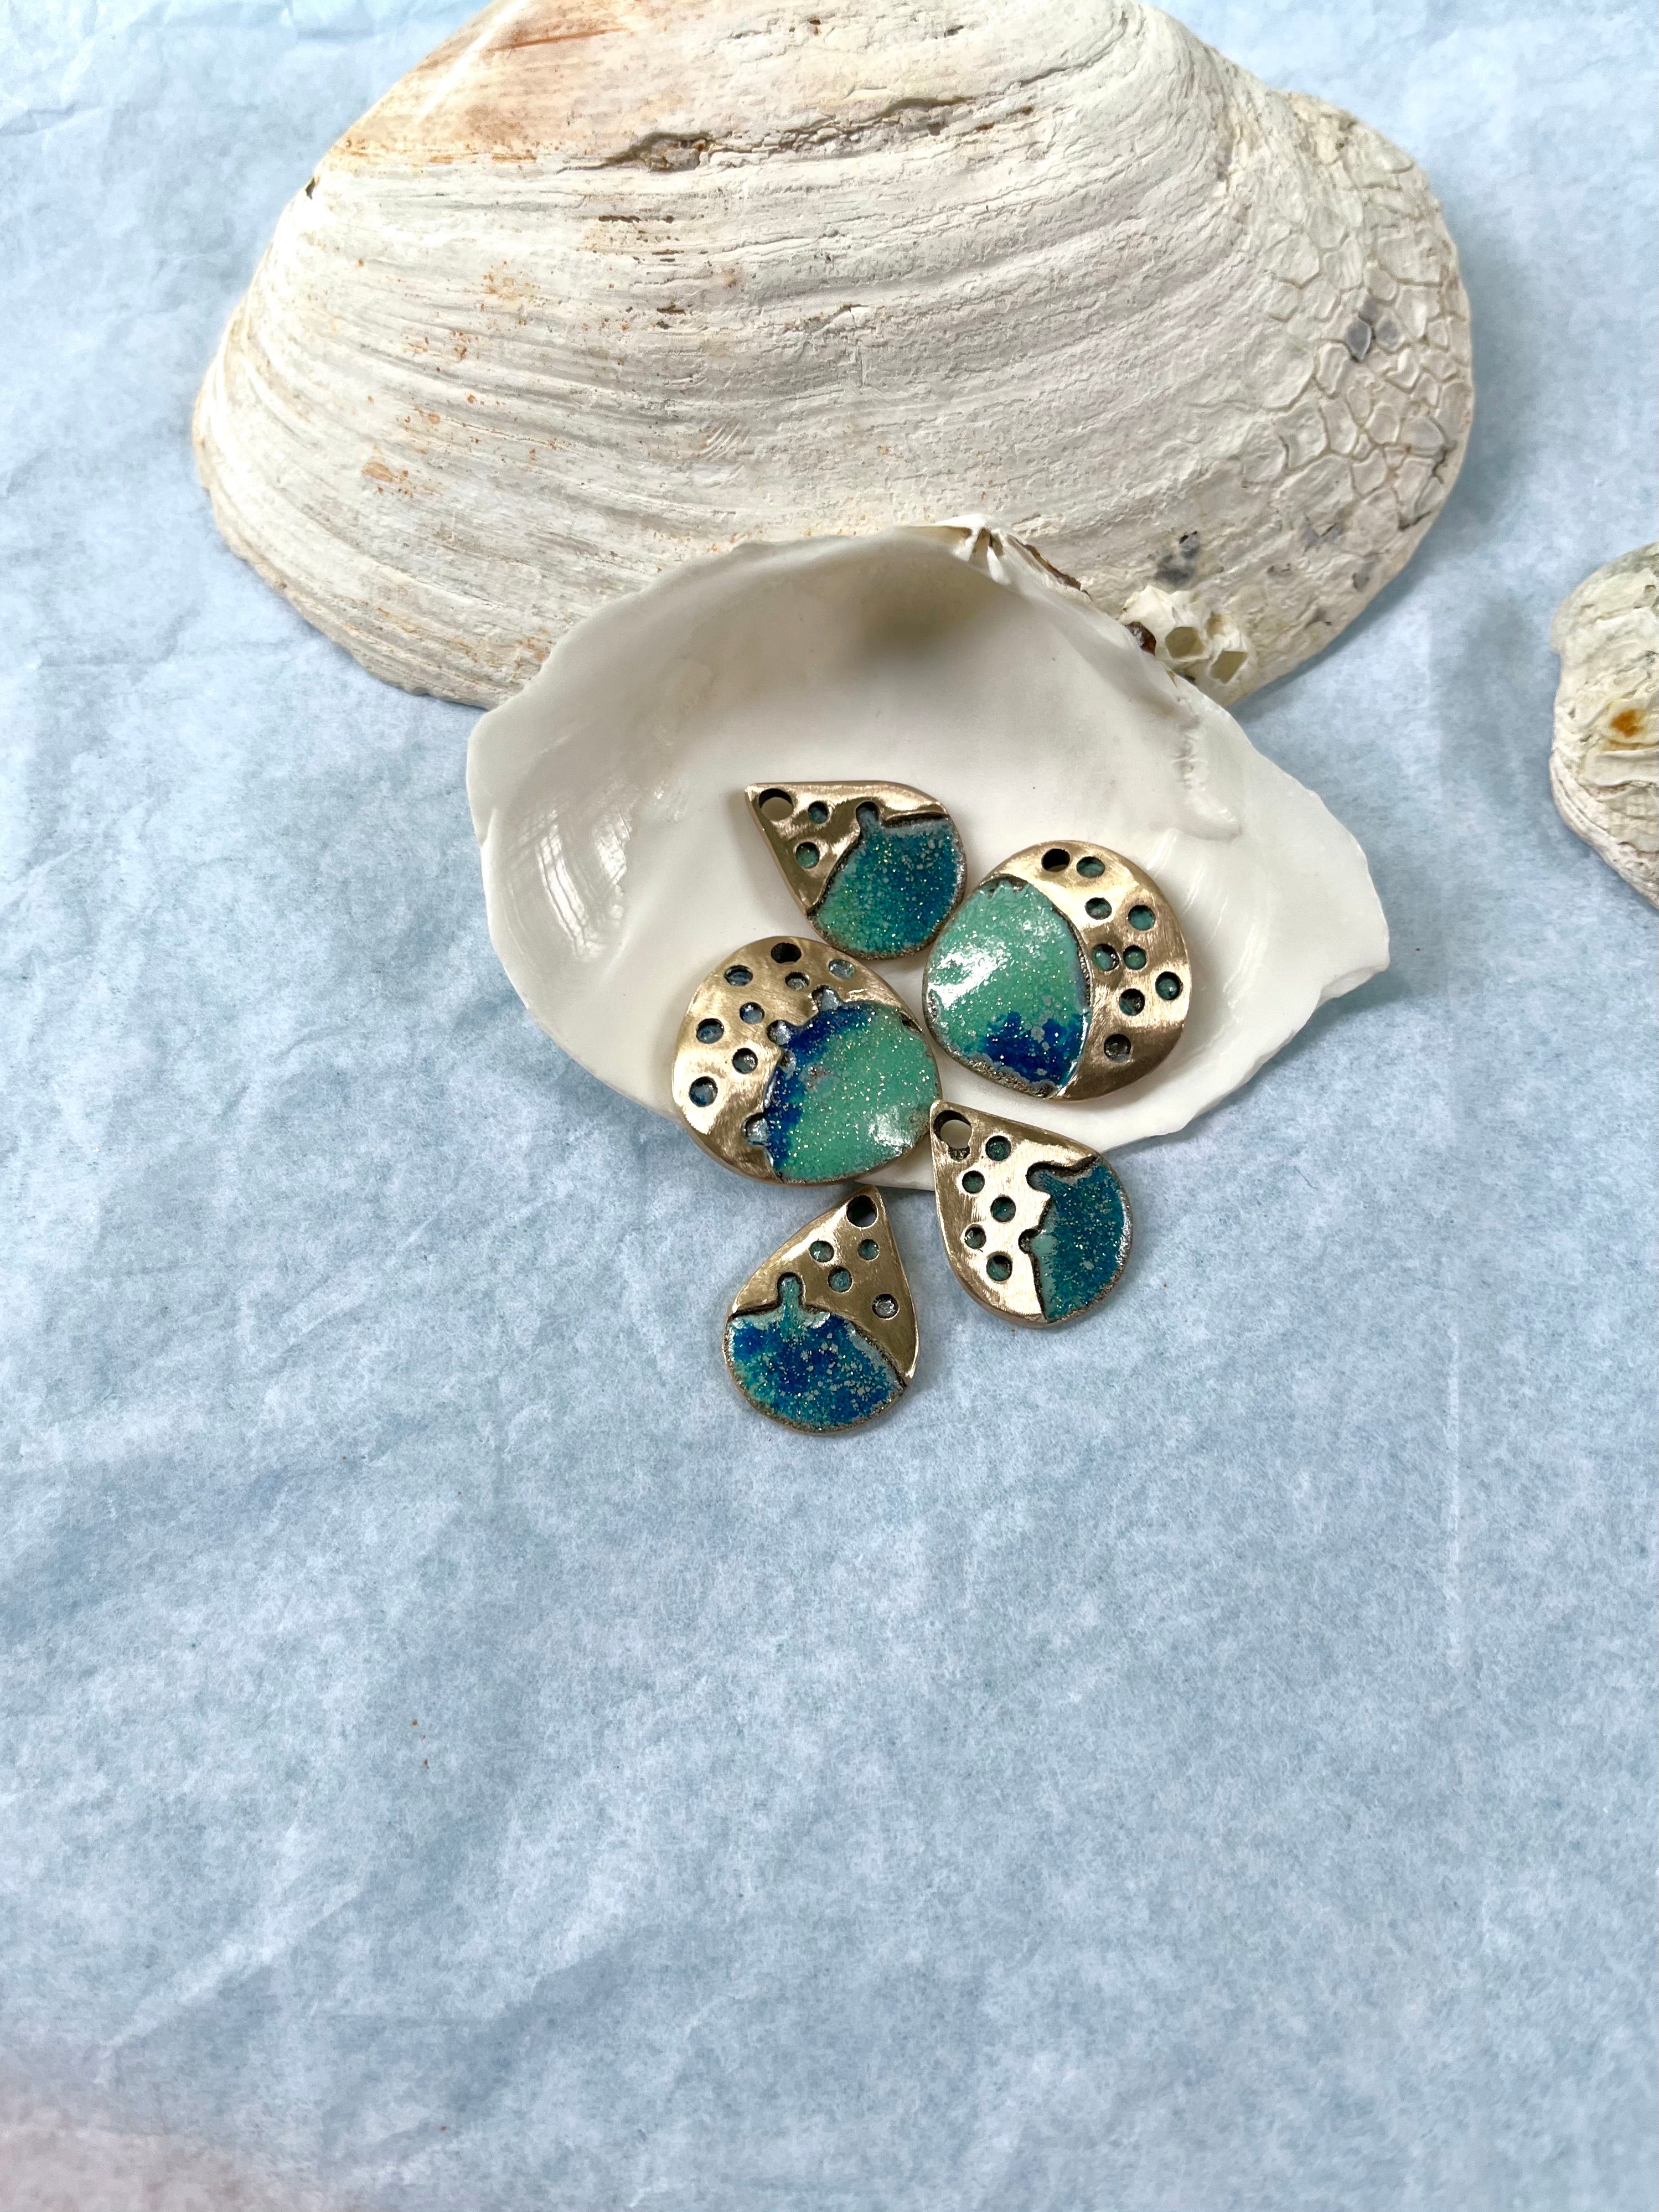 Ocean inspired bronze jewelry pieces tumbling from a seashell